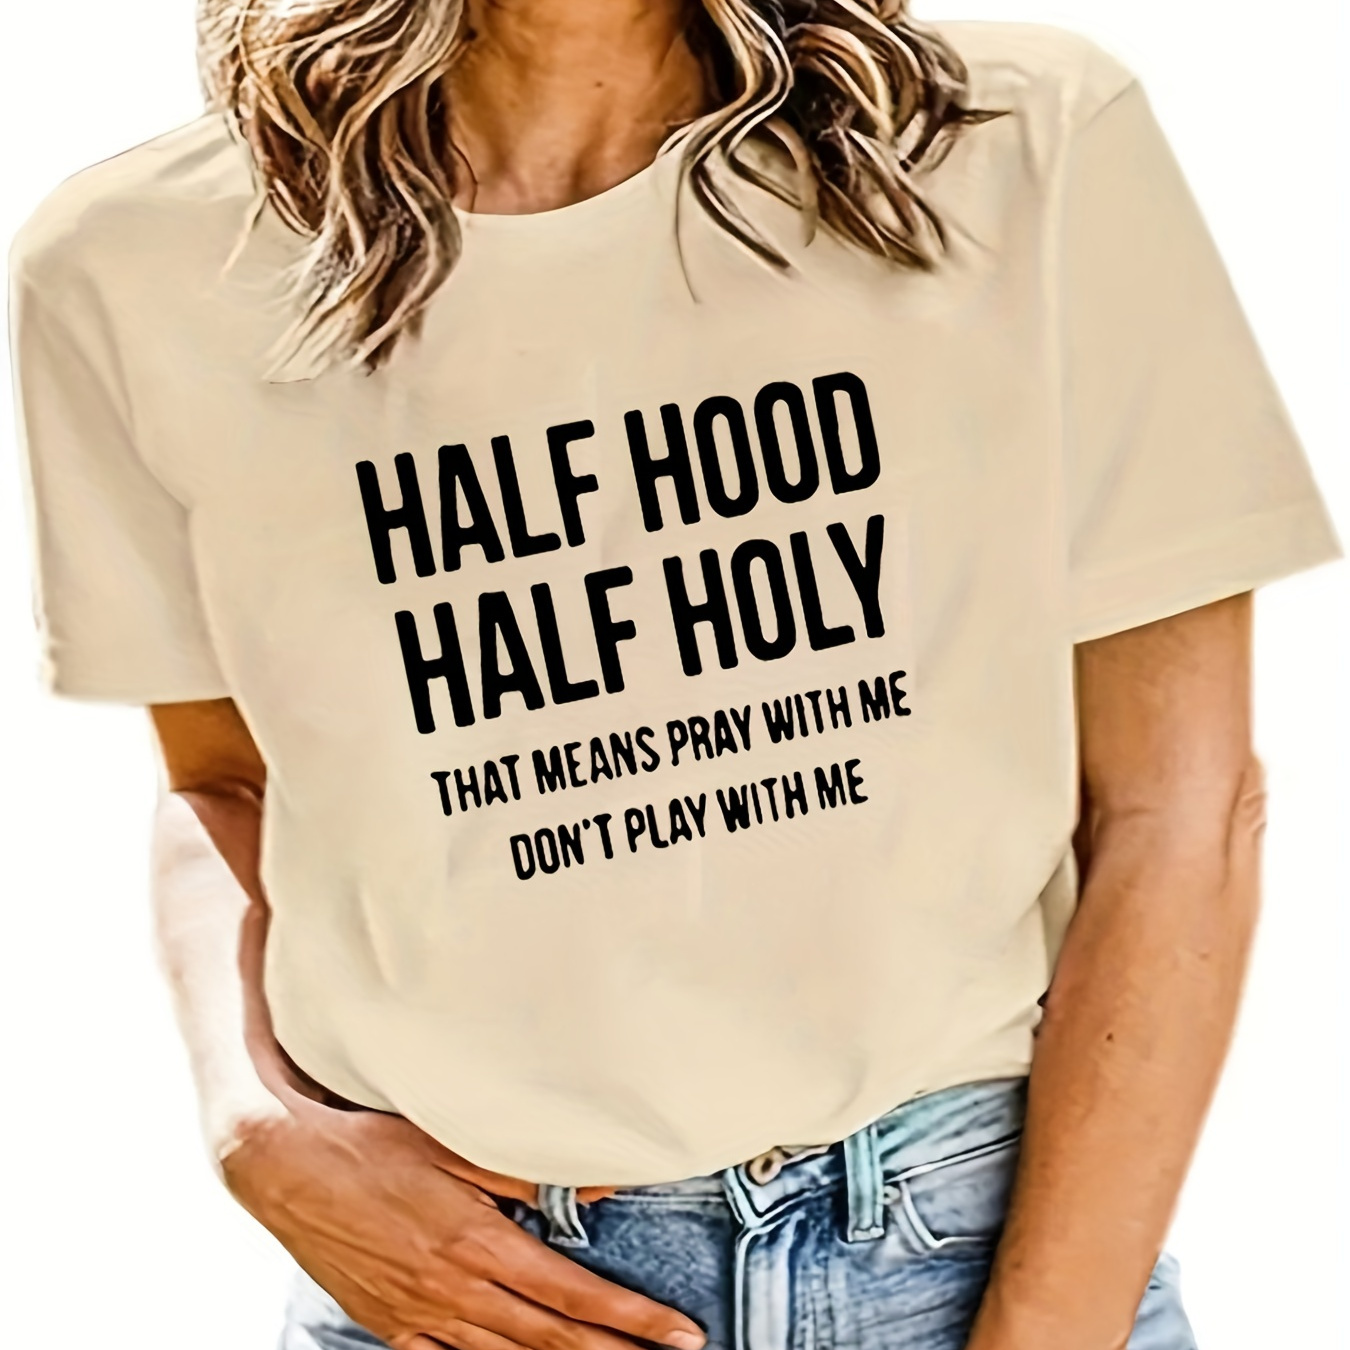 

Half Hood Half Holy Print T-shirt, Short Sleeve Crew Neck Casual Top For Summer & Spring, Women's Clothing